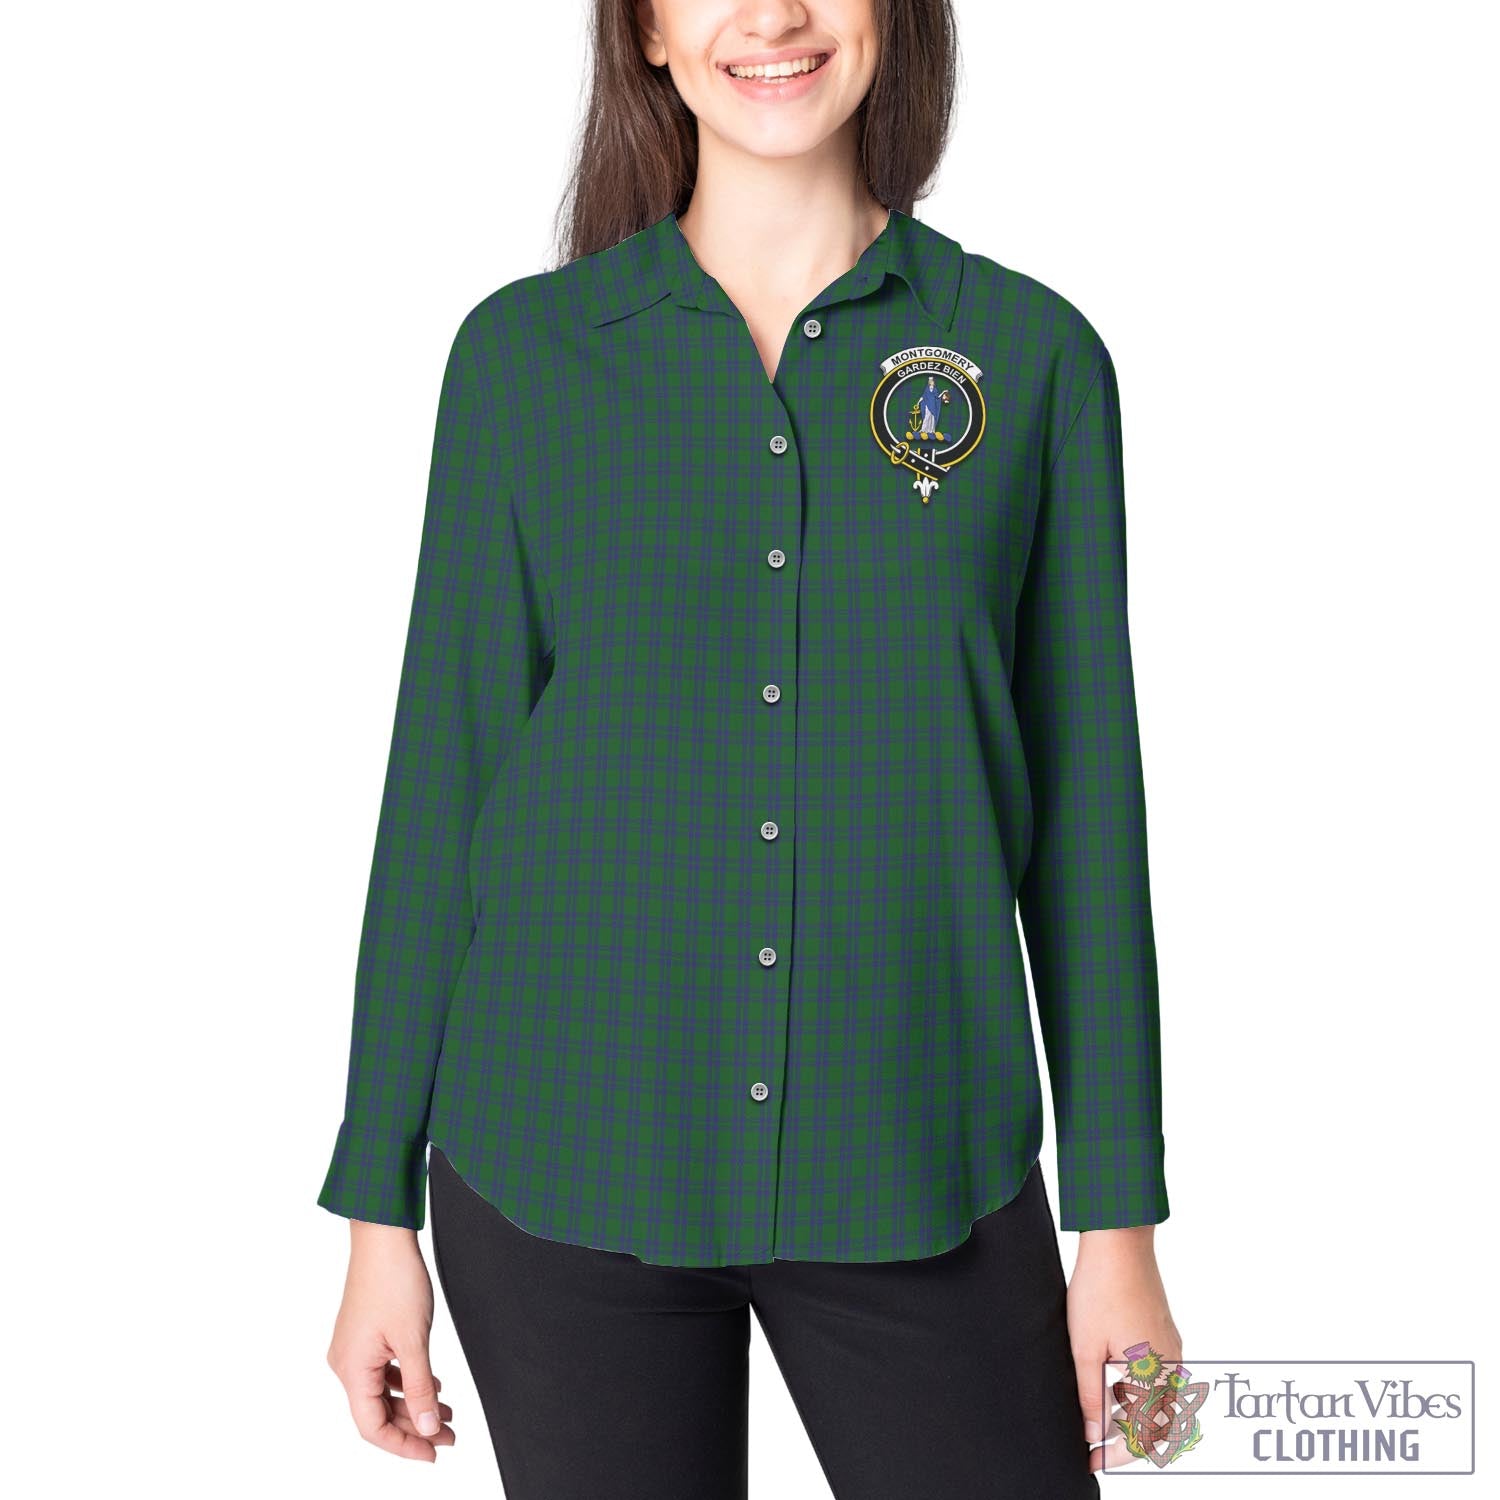 Tartan Vibes Clothing Montgomery Tartan Womens Casual Shirt with Family Crest